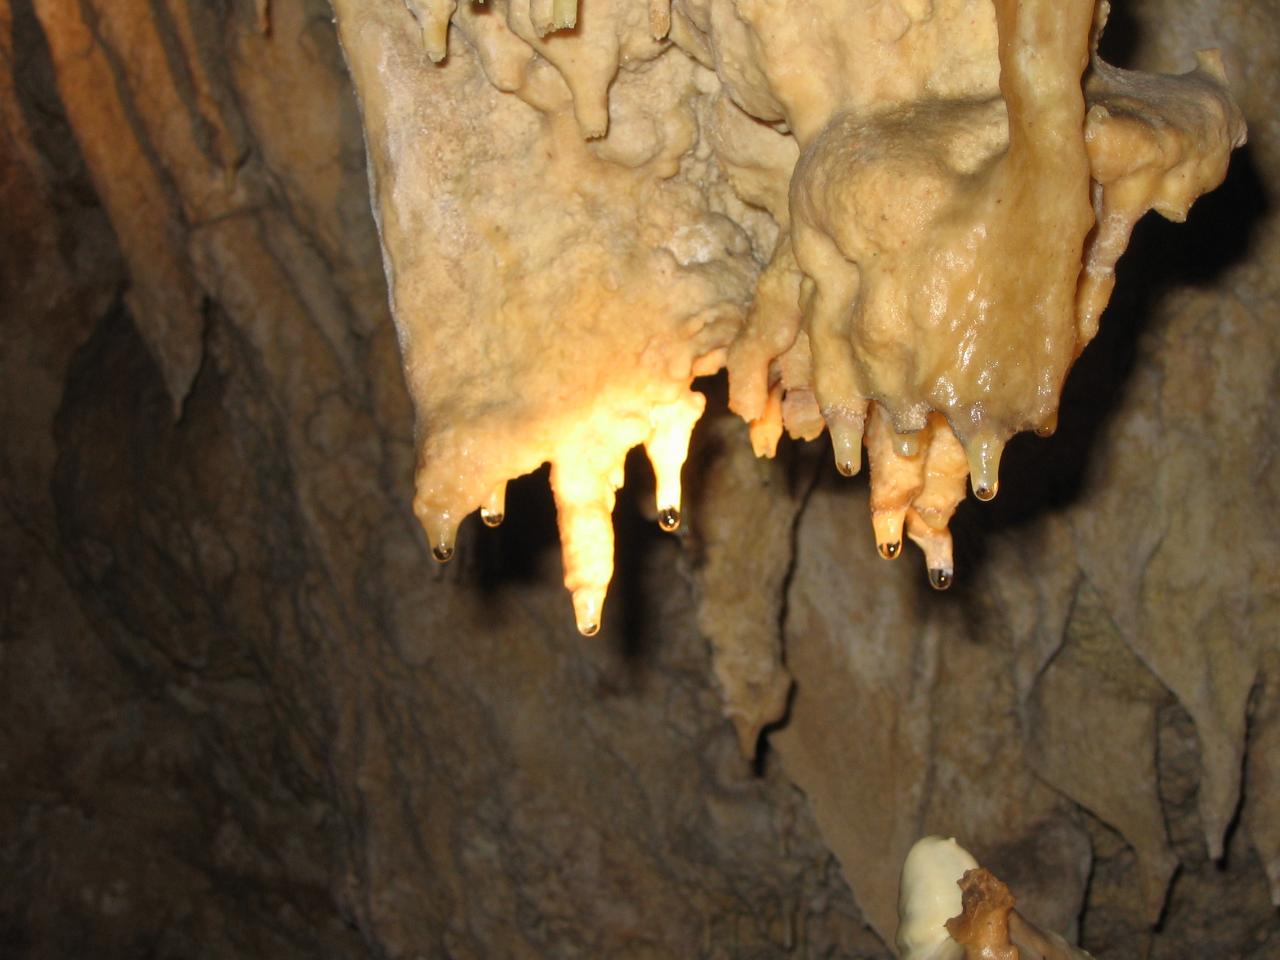 Yonderup Cave Tour